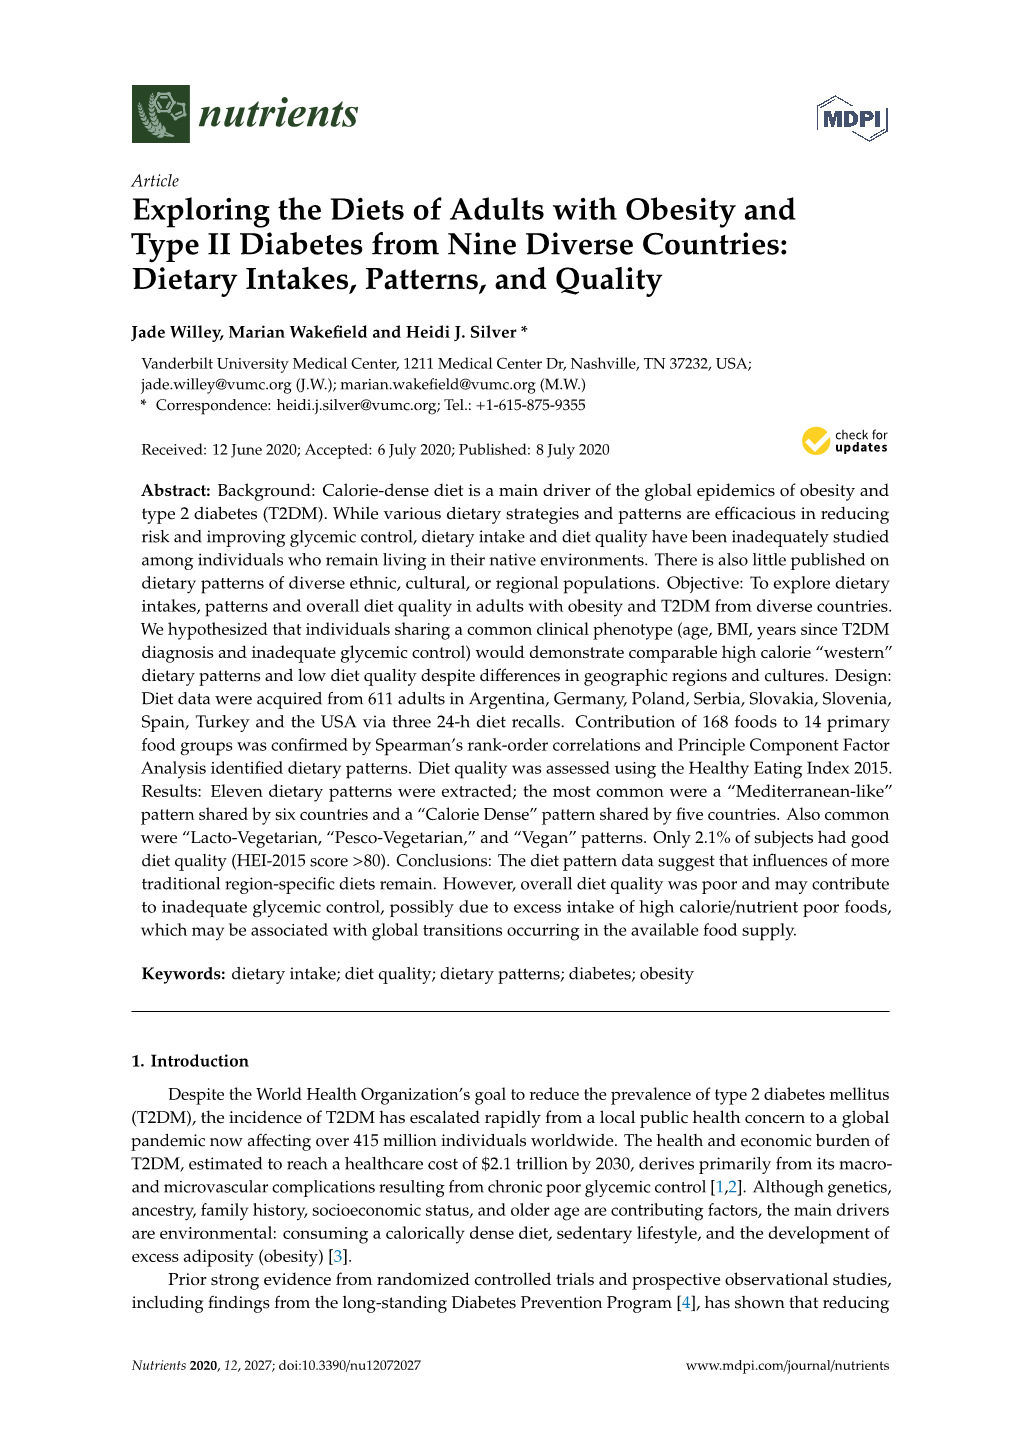 Exploring the Diets of Adults with Obesity and Type II Diabetes from Nine Diverse Countries: Dietary Intakes, Patterns, and Quality